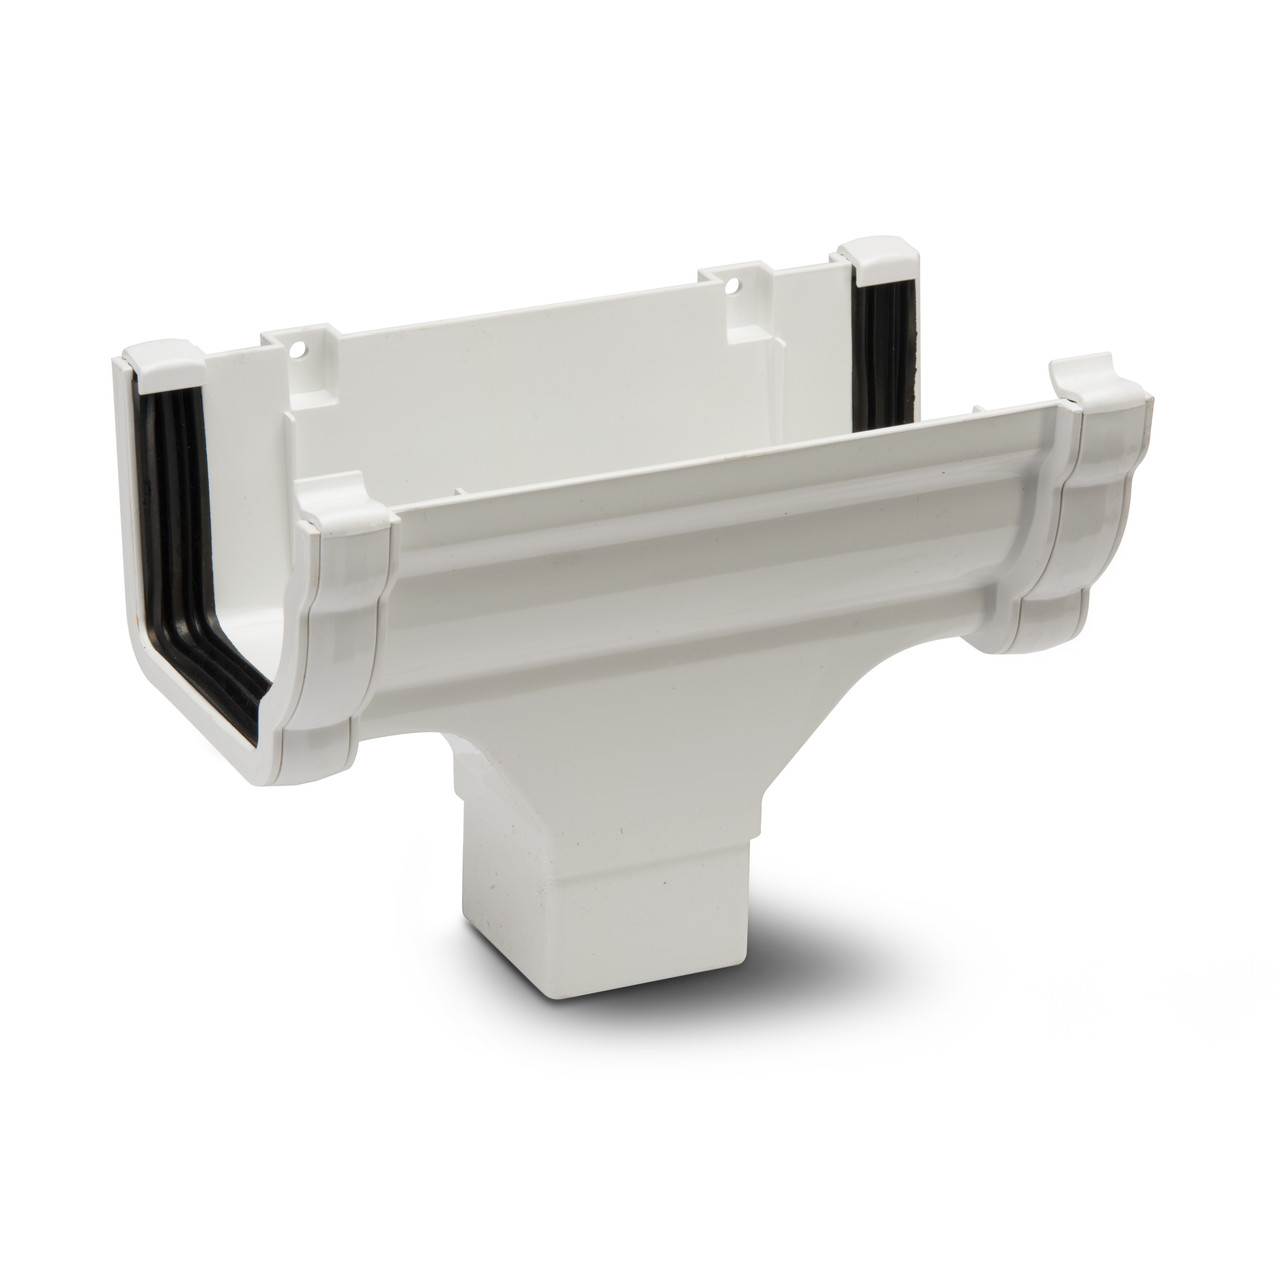 Photograph of Polypipe High Capacity Gutter White Running Outlet